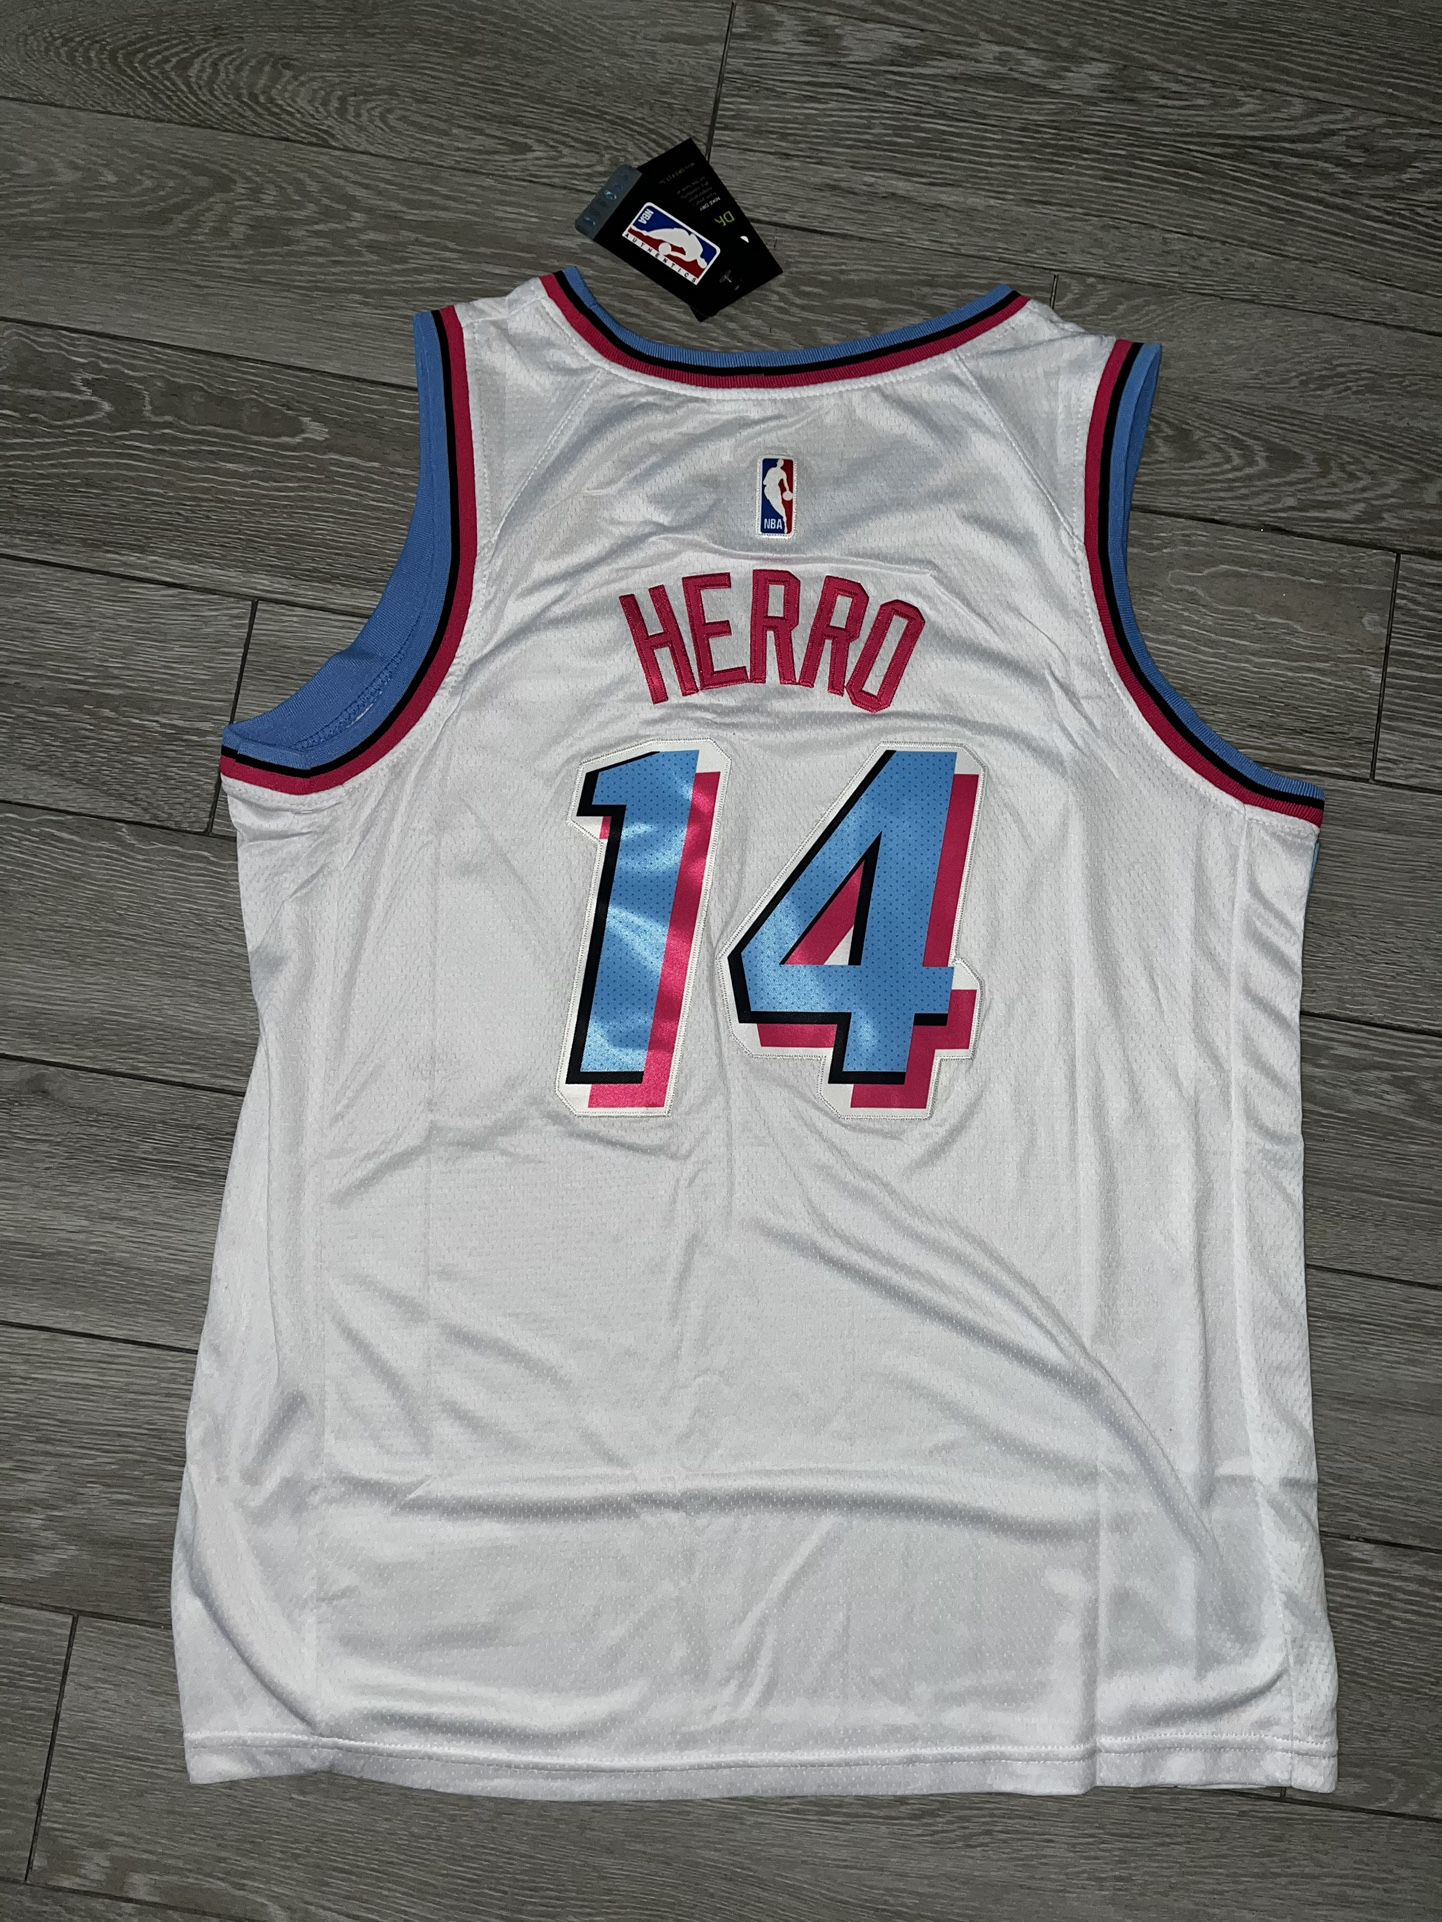 Tyler Herro Miami Vice Jersey (L) for Sale in Tacoma, WA - OfferUp